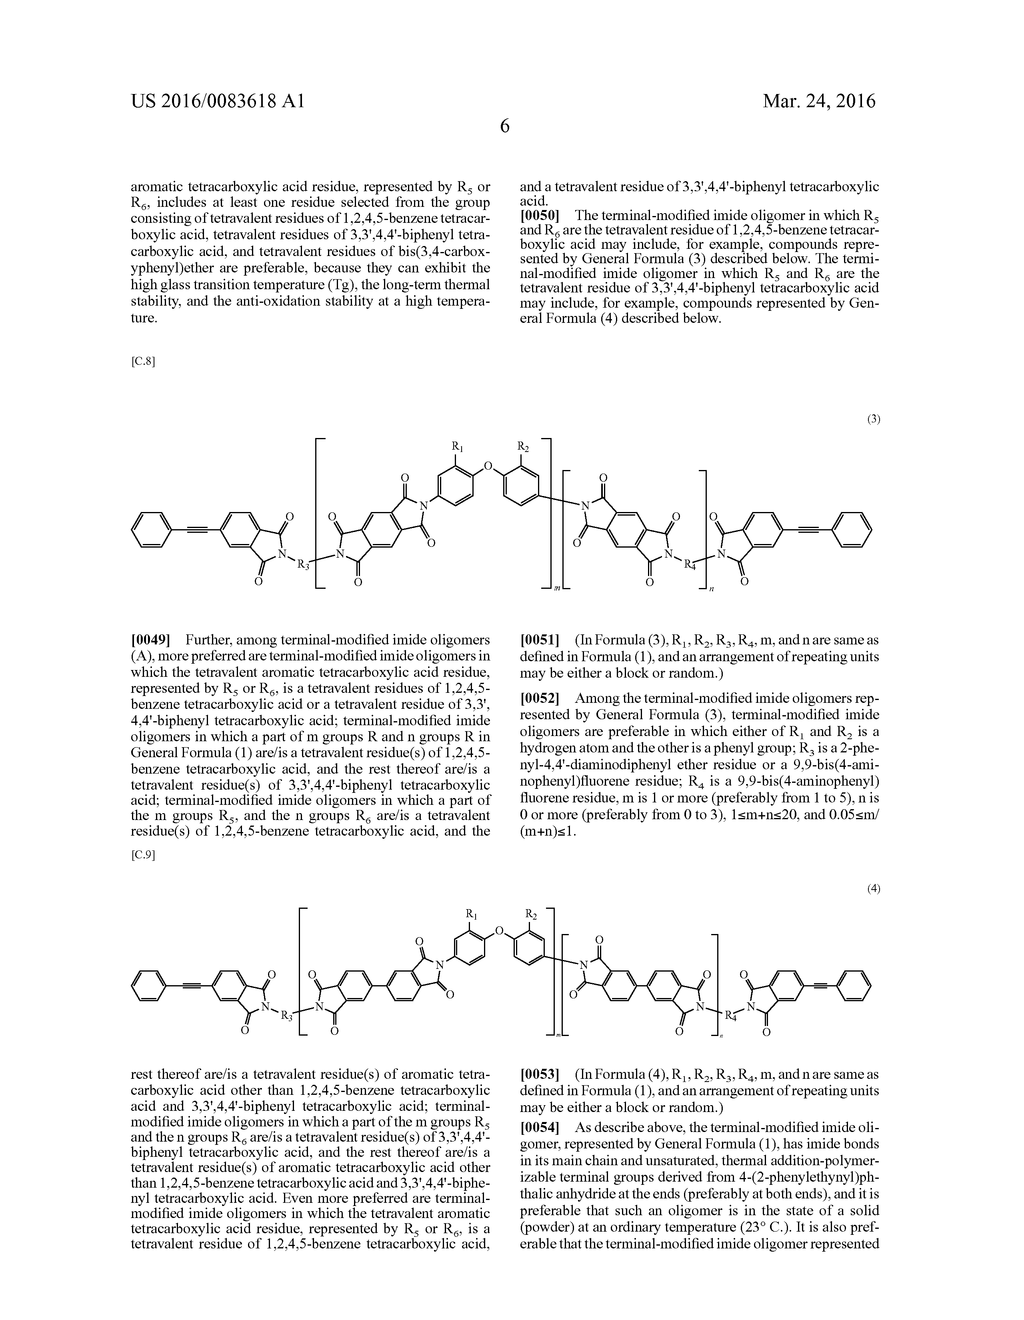 POLYIMIDE RESIN COMPOSITION AND VARNISH PRODUCED FROM TERMINAL-MODIFIED     IMIDE OLIGOMER PREPARED USING 2-PHENYL-4,4'-DIAMINODIPHENYL ETHER AND     THERMOPLASTIC AROMATIC POLYIMIDE PREPARED USING OXYDIPHTHALIC ACID,     POLYIMIDE RESIN COMPOSITION MOLDED ARTICLE AND PREPREG HAVING EXCELLENT     HEAT RESISTANCE AND MECHANICAL CHARACTERISTIC, AND FIBER-REINFORCED     COMPOSITE MATERIAL THEREOF - diagram, schematic, and image 07